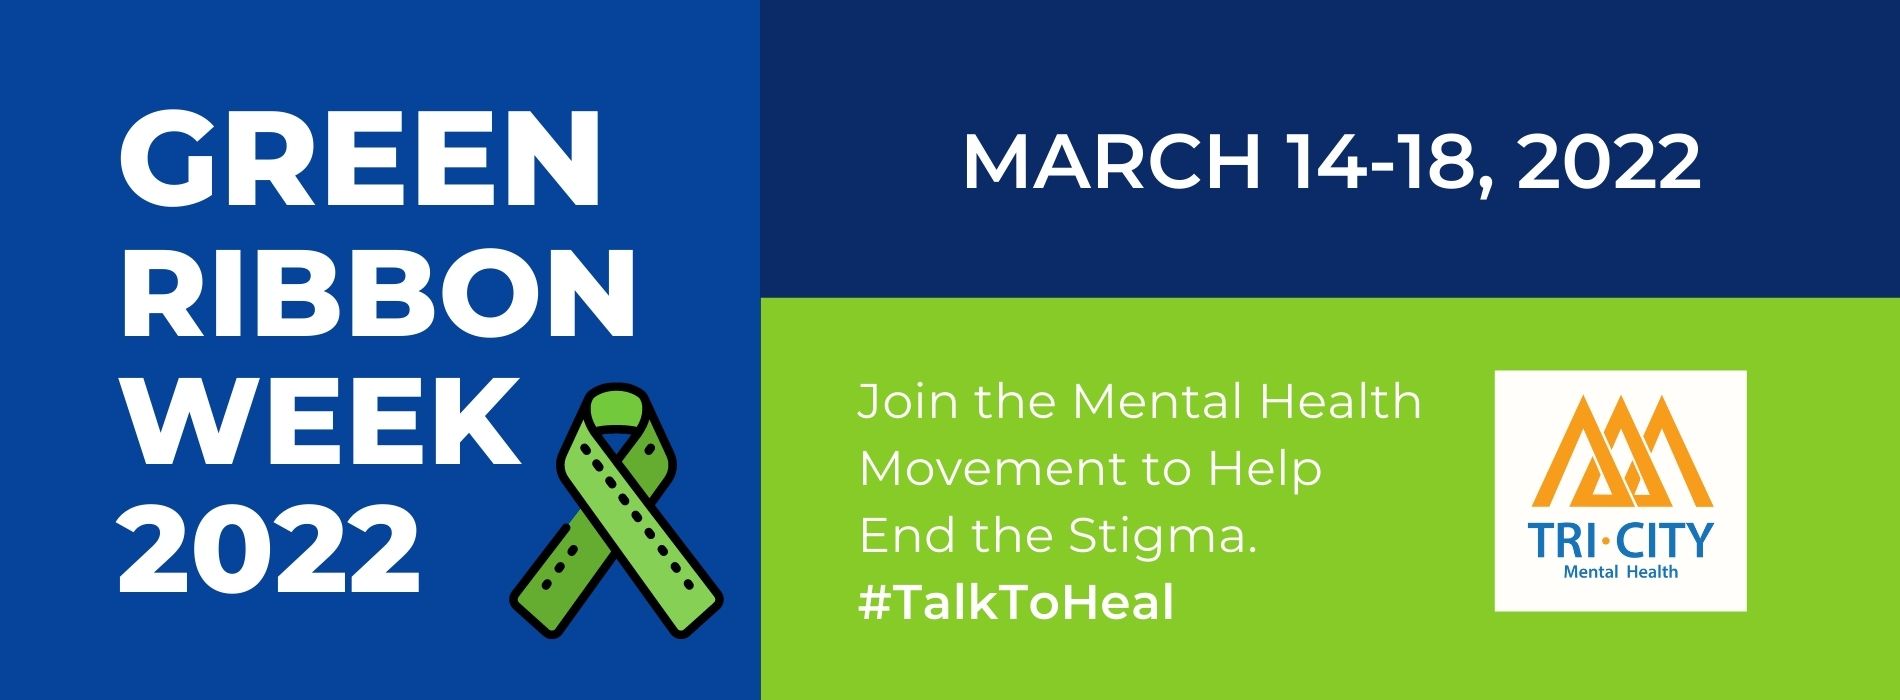 Green Ribbon Week March 14-18, 2022. Join the Mental Health Movement to Help  End the Stigma. #TalkToHeal. 